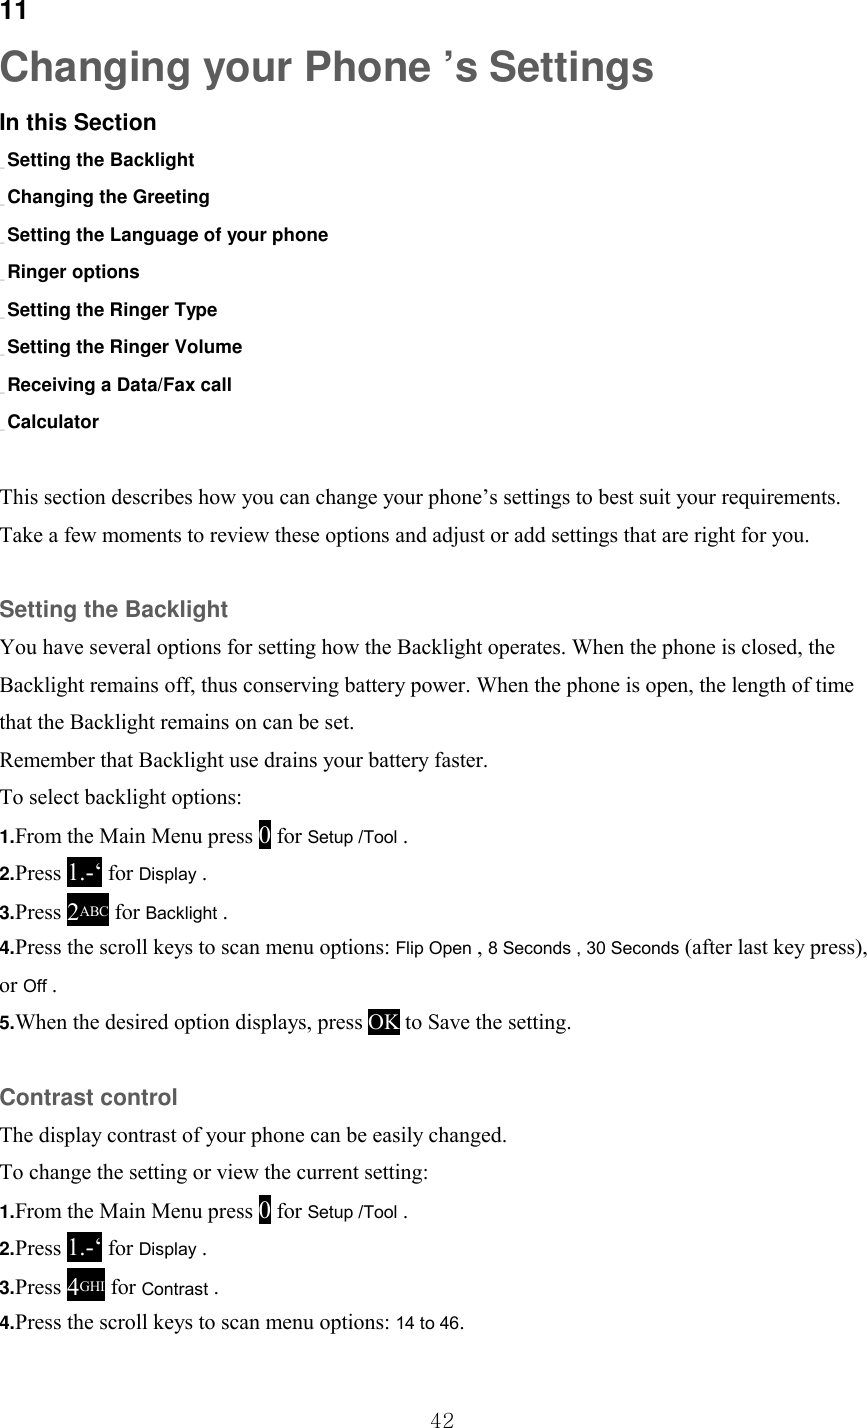  42 11 Changing your Phone ’s Settings In this Section _ Setting the Backlight _ Changing the Greeting _ Setting the Language of your phone _ Ringer options _ Setting the Ringer Type _ Setting the Ringer Volume _ Receiving a Data/Fax call _ Calculator  This section describes how you can change your phone’s settings to best suit your requirements. Take a few moments to review these options and adjust or add settings that are right for you.  Setting the Backlight You have several options for setting how the Backlight operates. When the phone is closed, the Backlight remains off, thus conserving battery power. When the phone is open, the length of time that the Backlight remains on can be set. Remember that Backlight use drains your battery faster. To select backlight options: 1.From the Main Menu press 0 for Setup /Tool . 2.Press 1.-‘ for Display . 3.Press 2ABC for Backlight . 4.Press the scroll keys to scan menu options: Flip Open , 8 Seconds , 30 Seconds (after last key press), or Off . 5.When the desired option displays, press OK to Save the setting.  Contrast control The display contrast of your phone can be easily changed. To change the setting or view the current setting: 1.From the Main Menu press 0 for Setup /Tool . 2.Press 1.-‘ for Display . 3.Press 4GHI for Contrast . 4.Press the scroll keys to scan menu options: 14 to 46. 